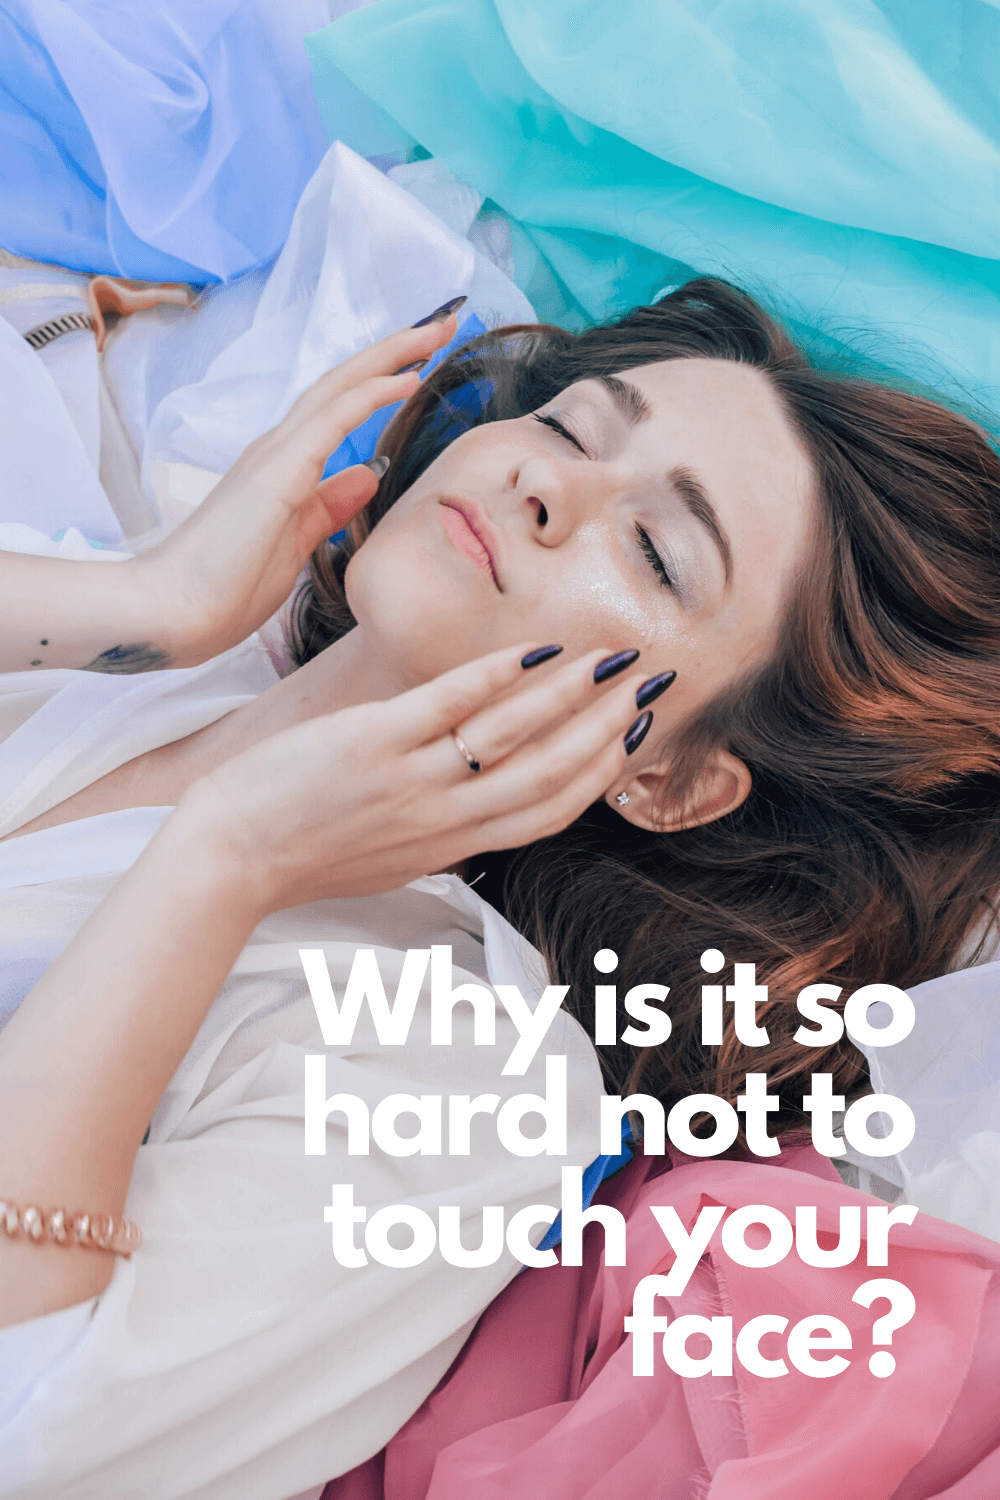 Why is it so hard not to touch your face?